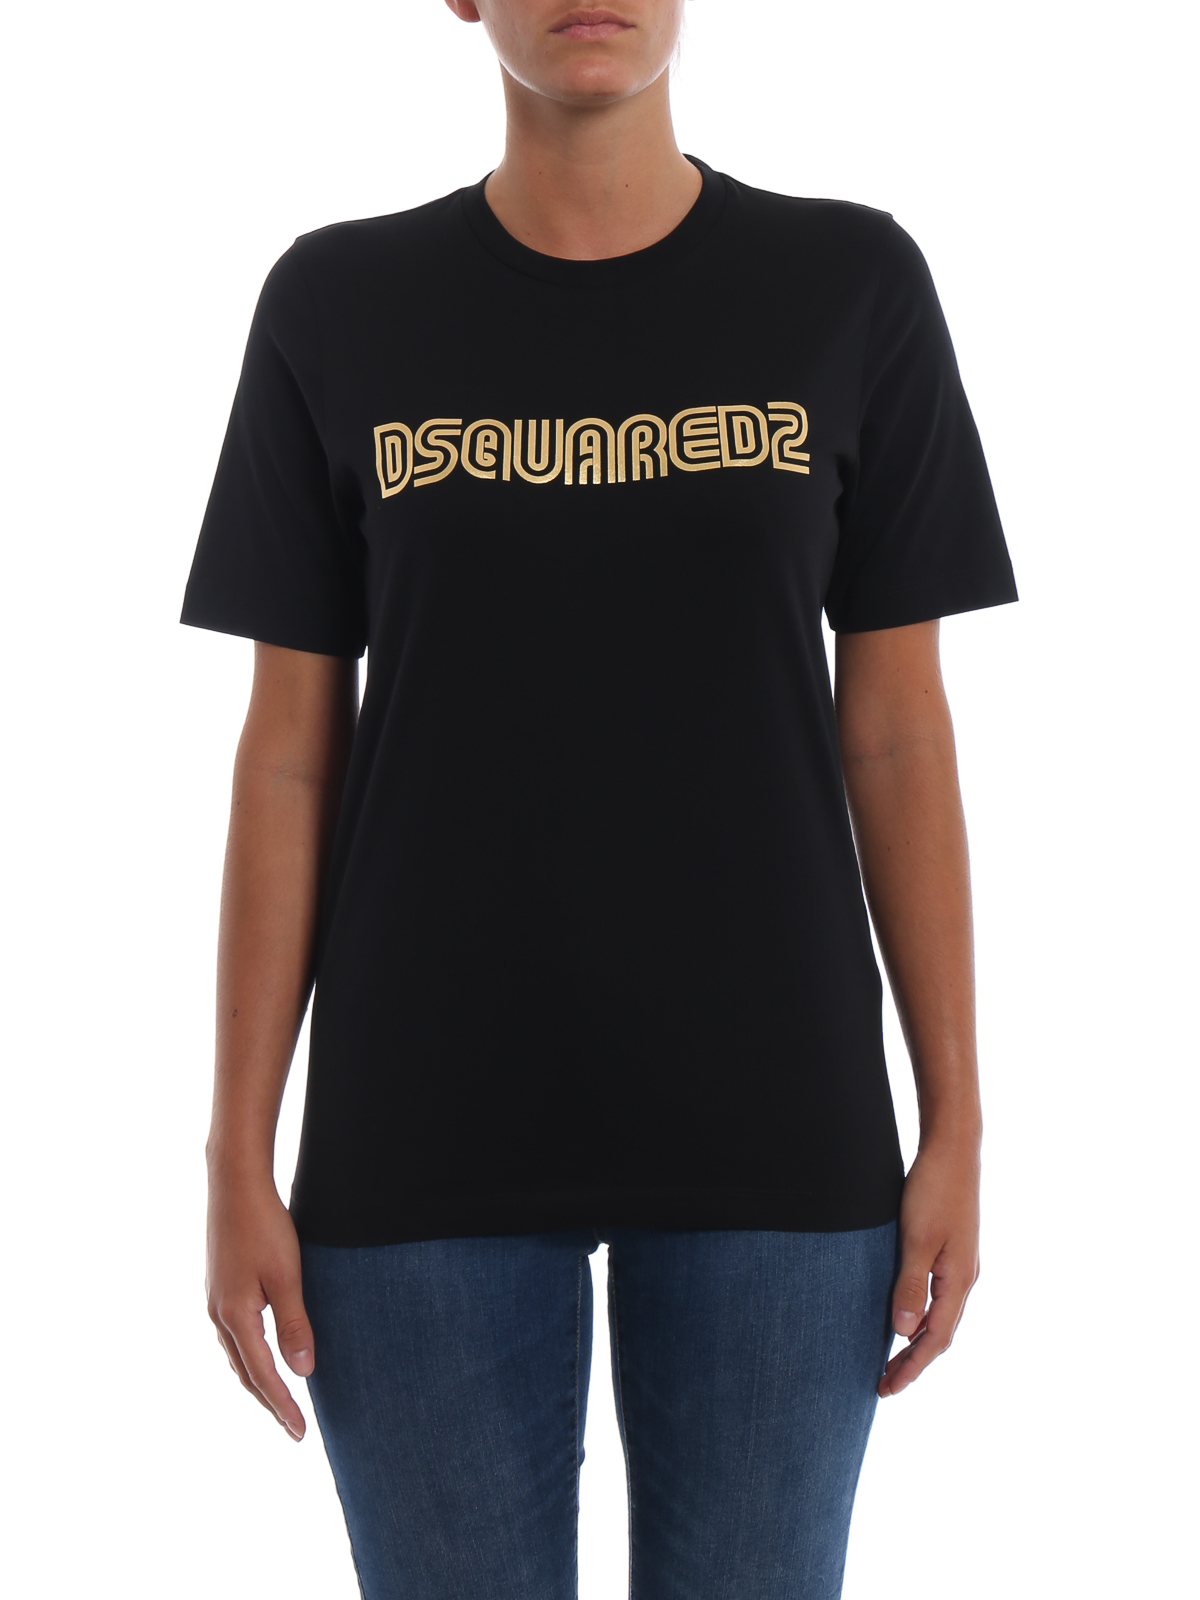 black and gold dsquared t shirt